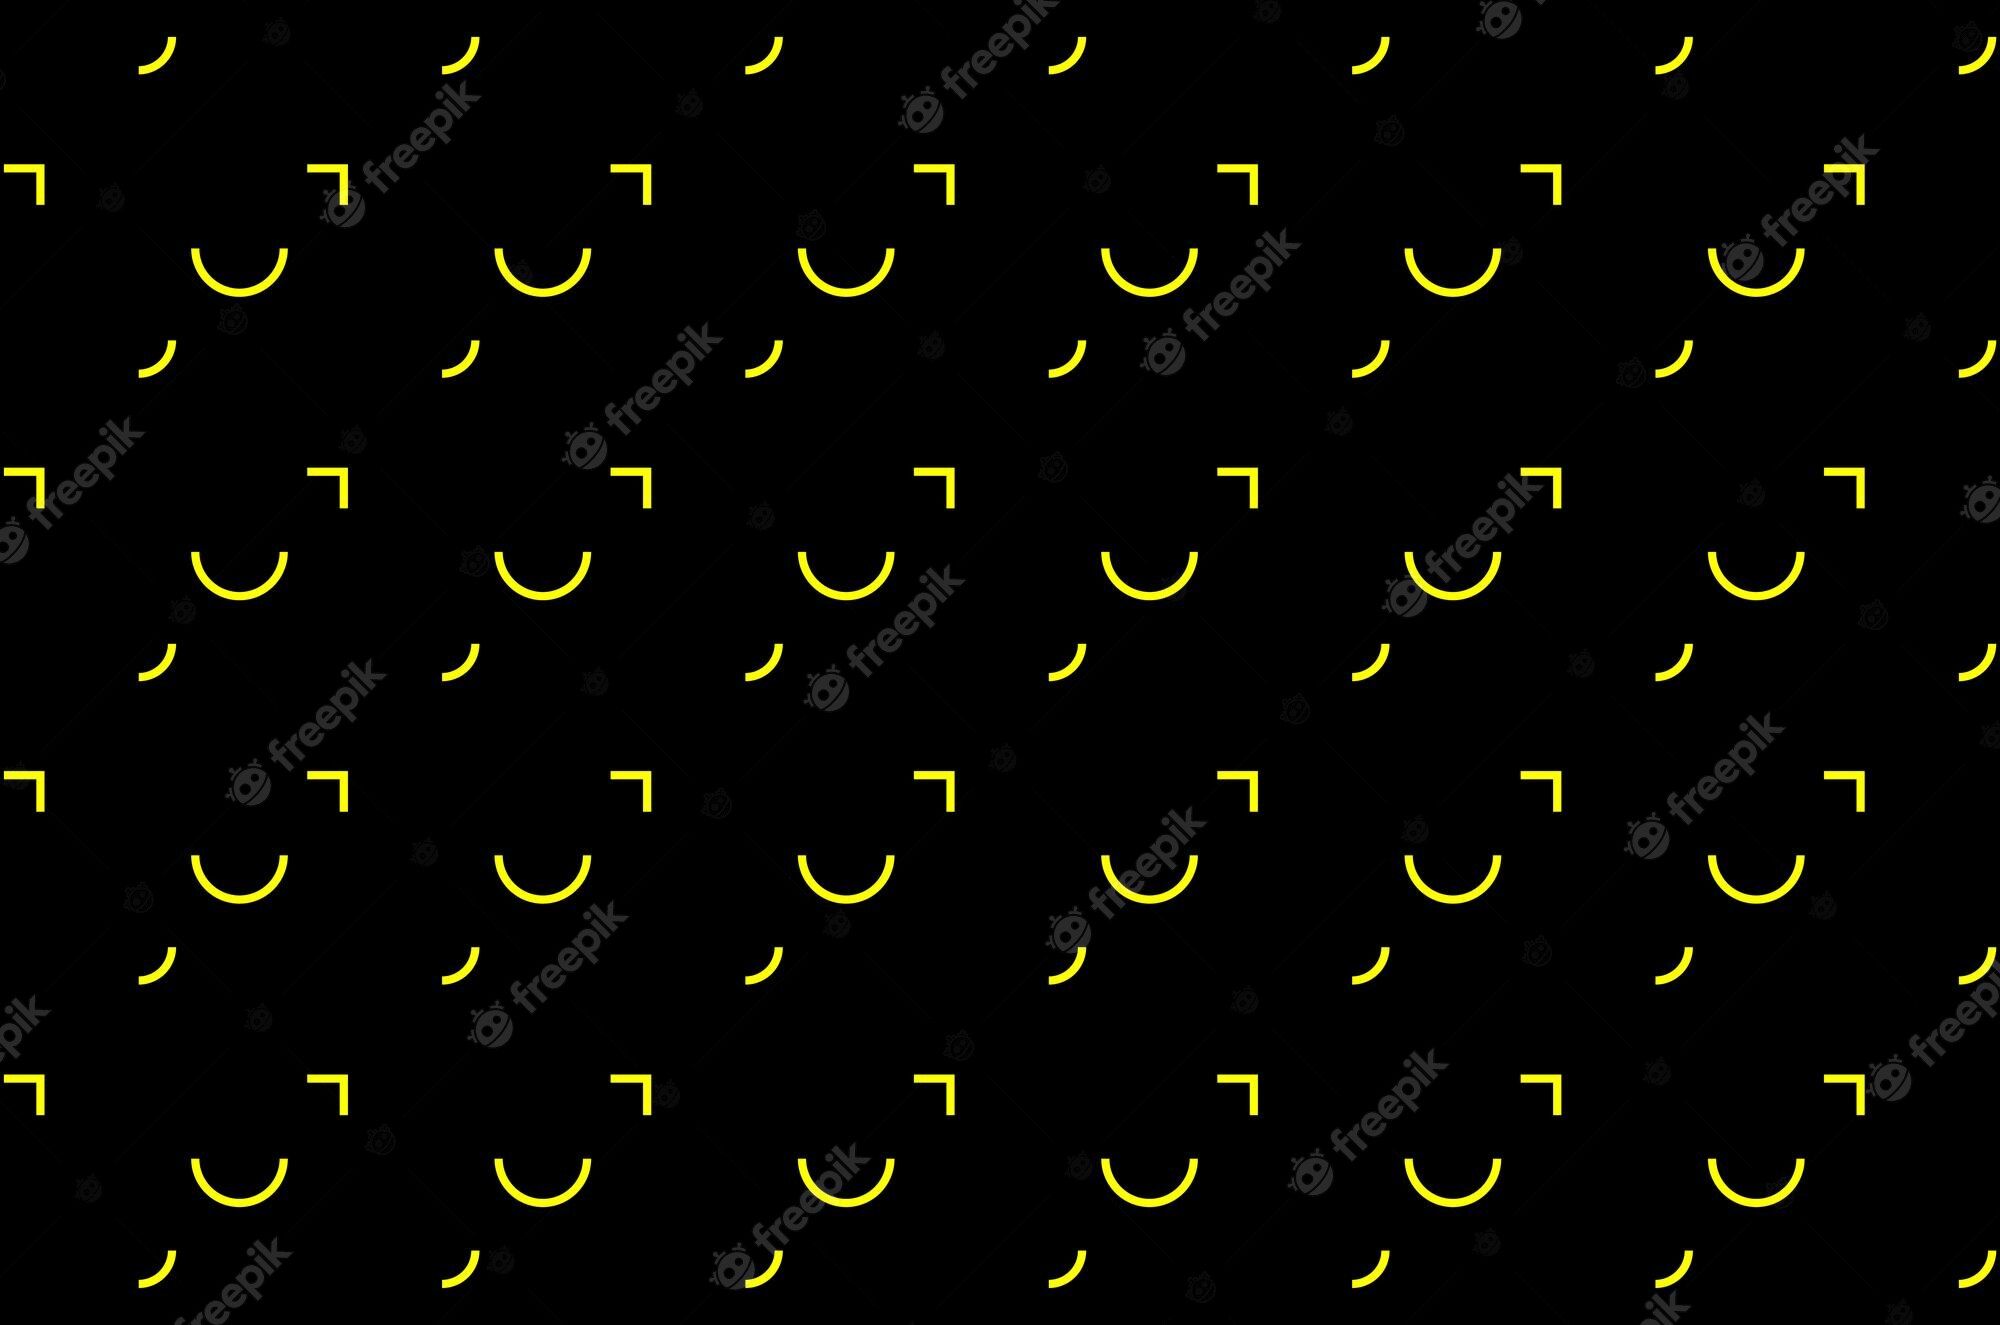 A seamless pattern with yellow smiley faces on black background - Smile